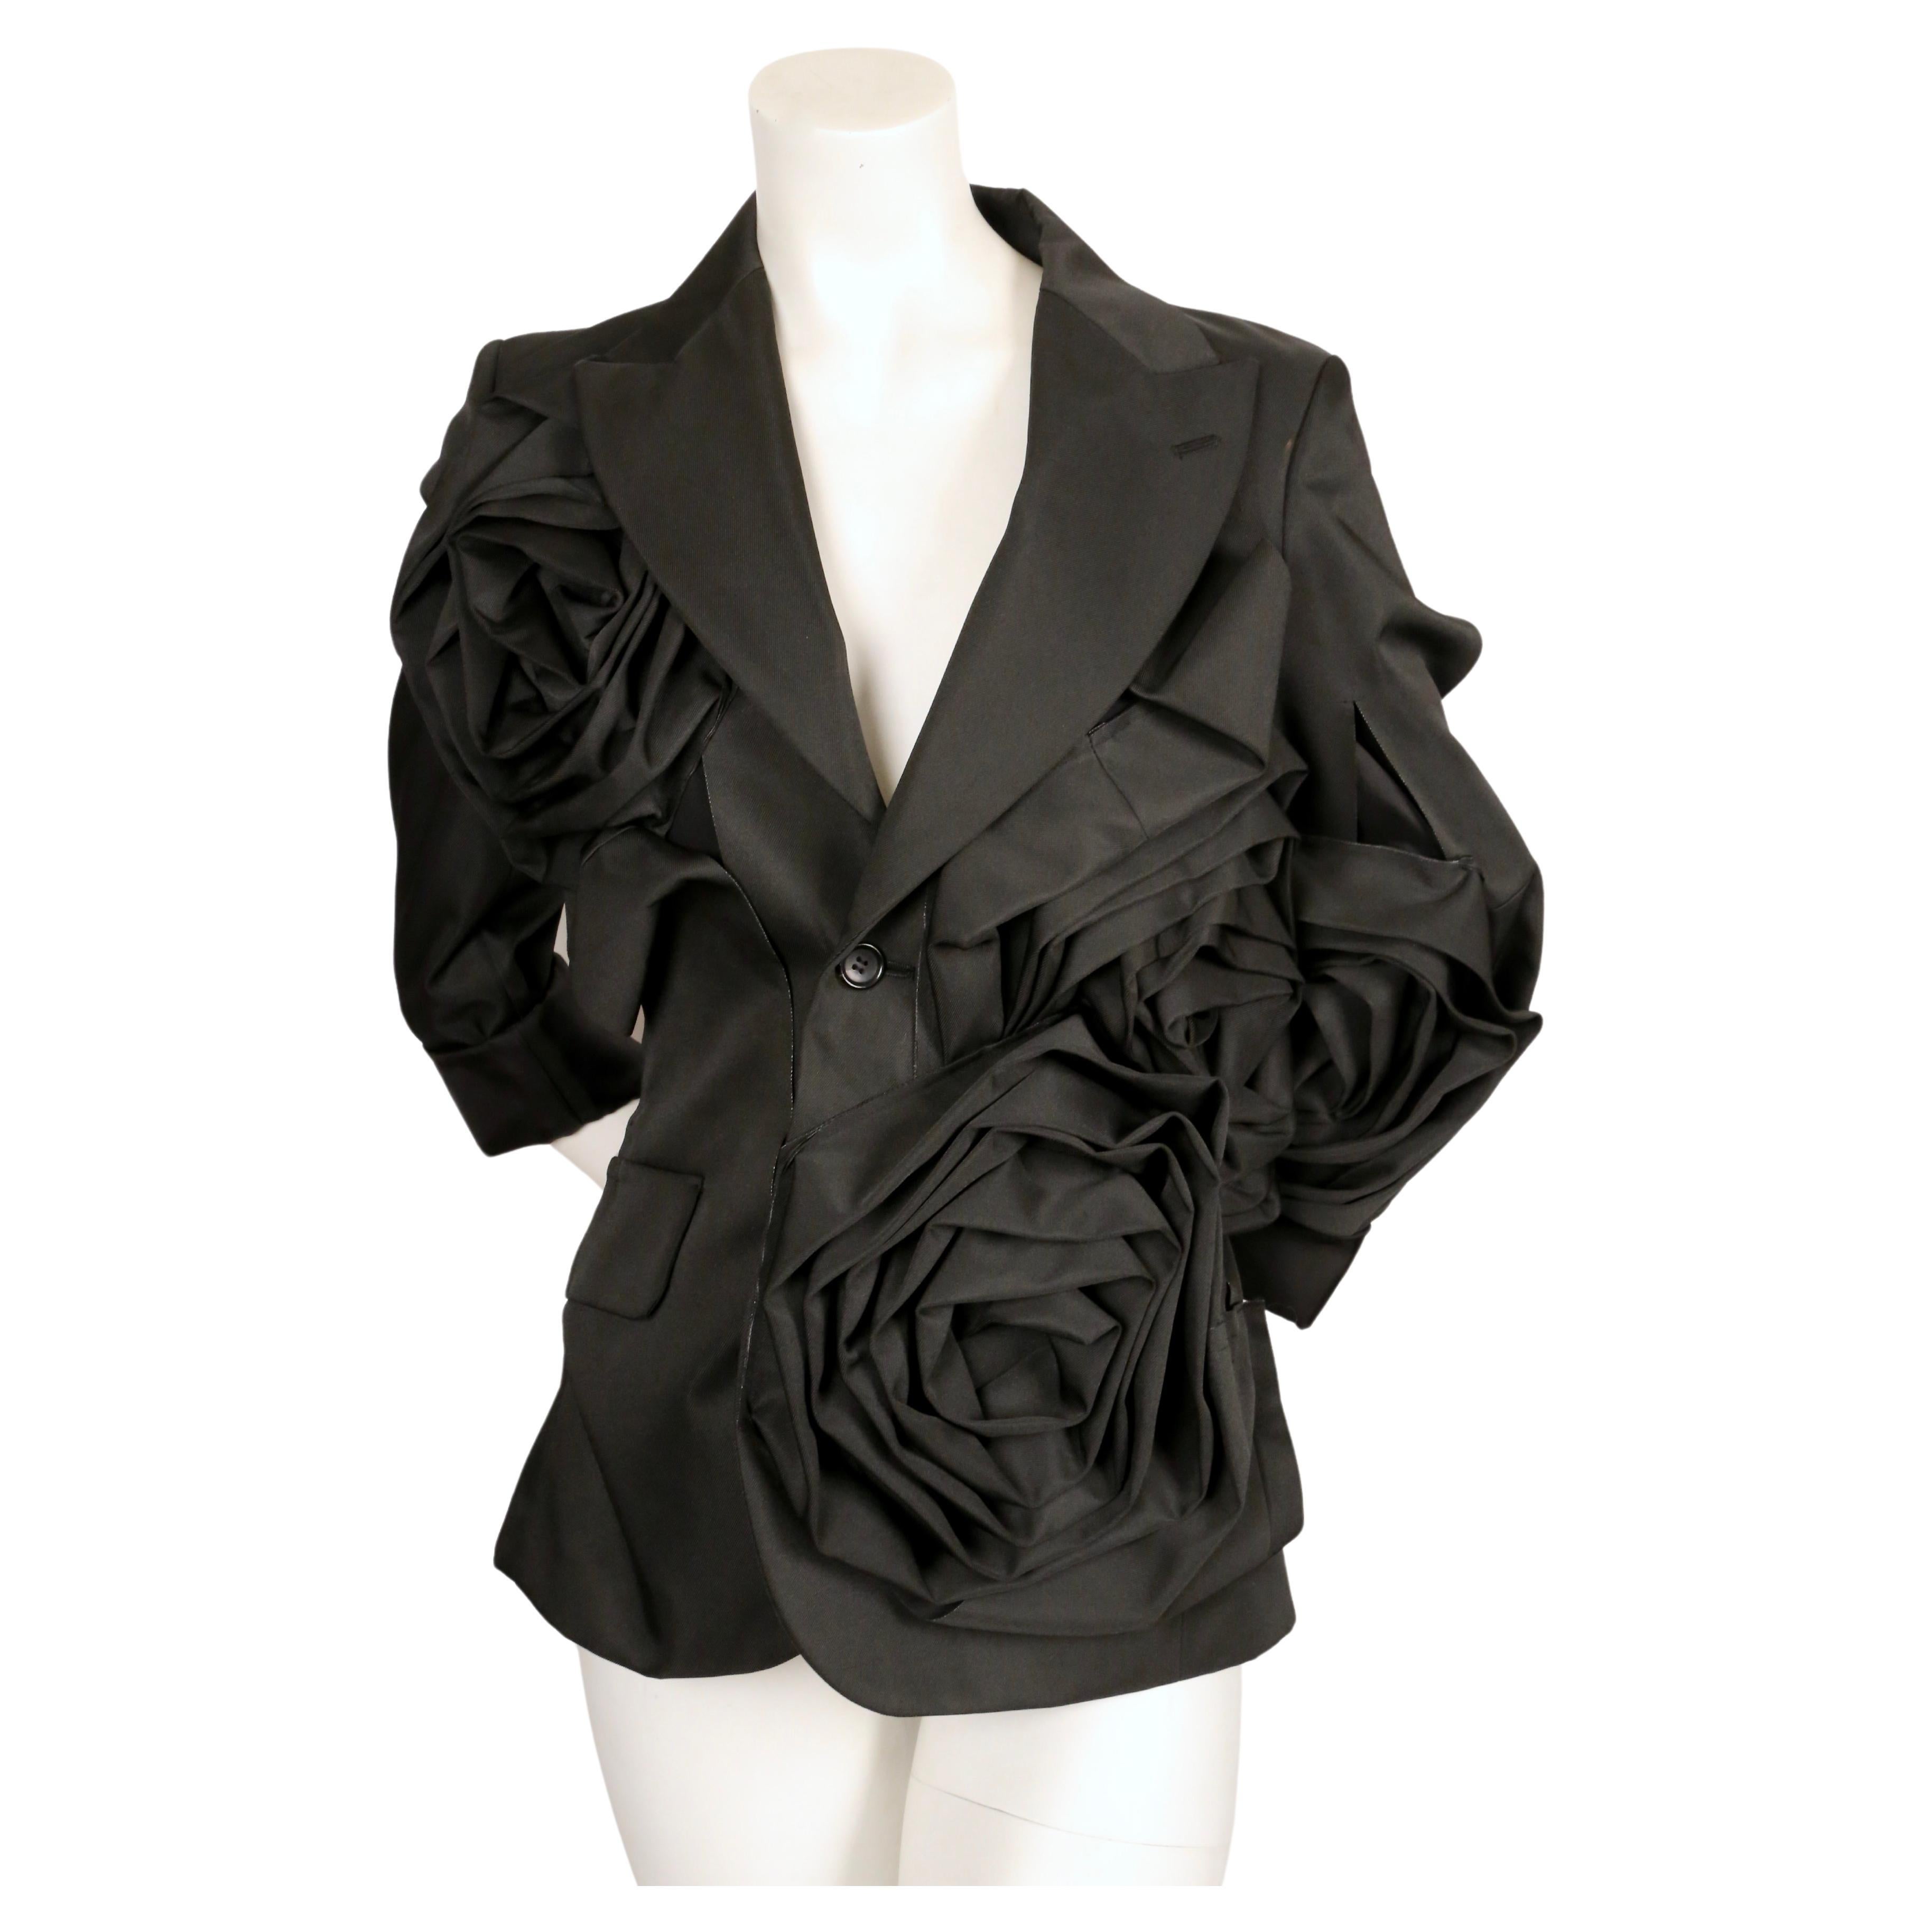 Very dramatic asymmetrical black jacket with oversized rose motif and cut outs designed by Rei Kawakubo for Comme Des Garcons exactly as seen on the fall 2013 runway.  Labeled a size 'S'. Approximate measurements: shoulder 16.25